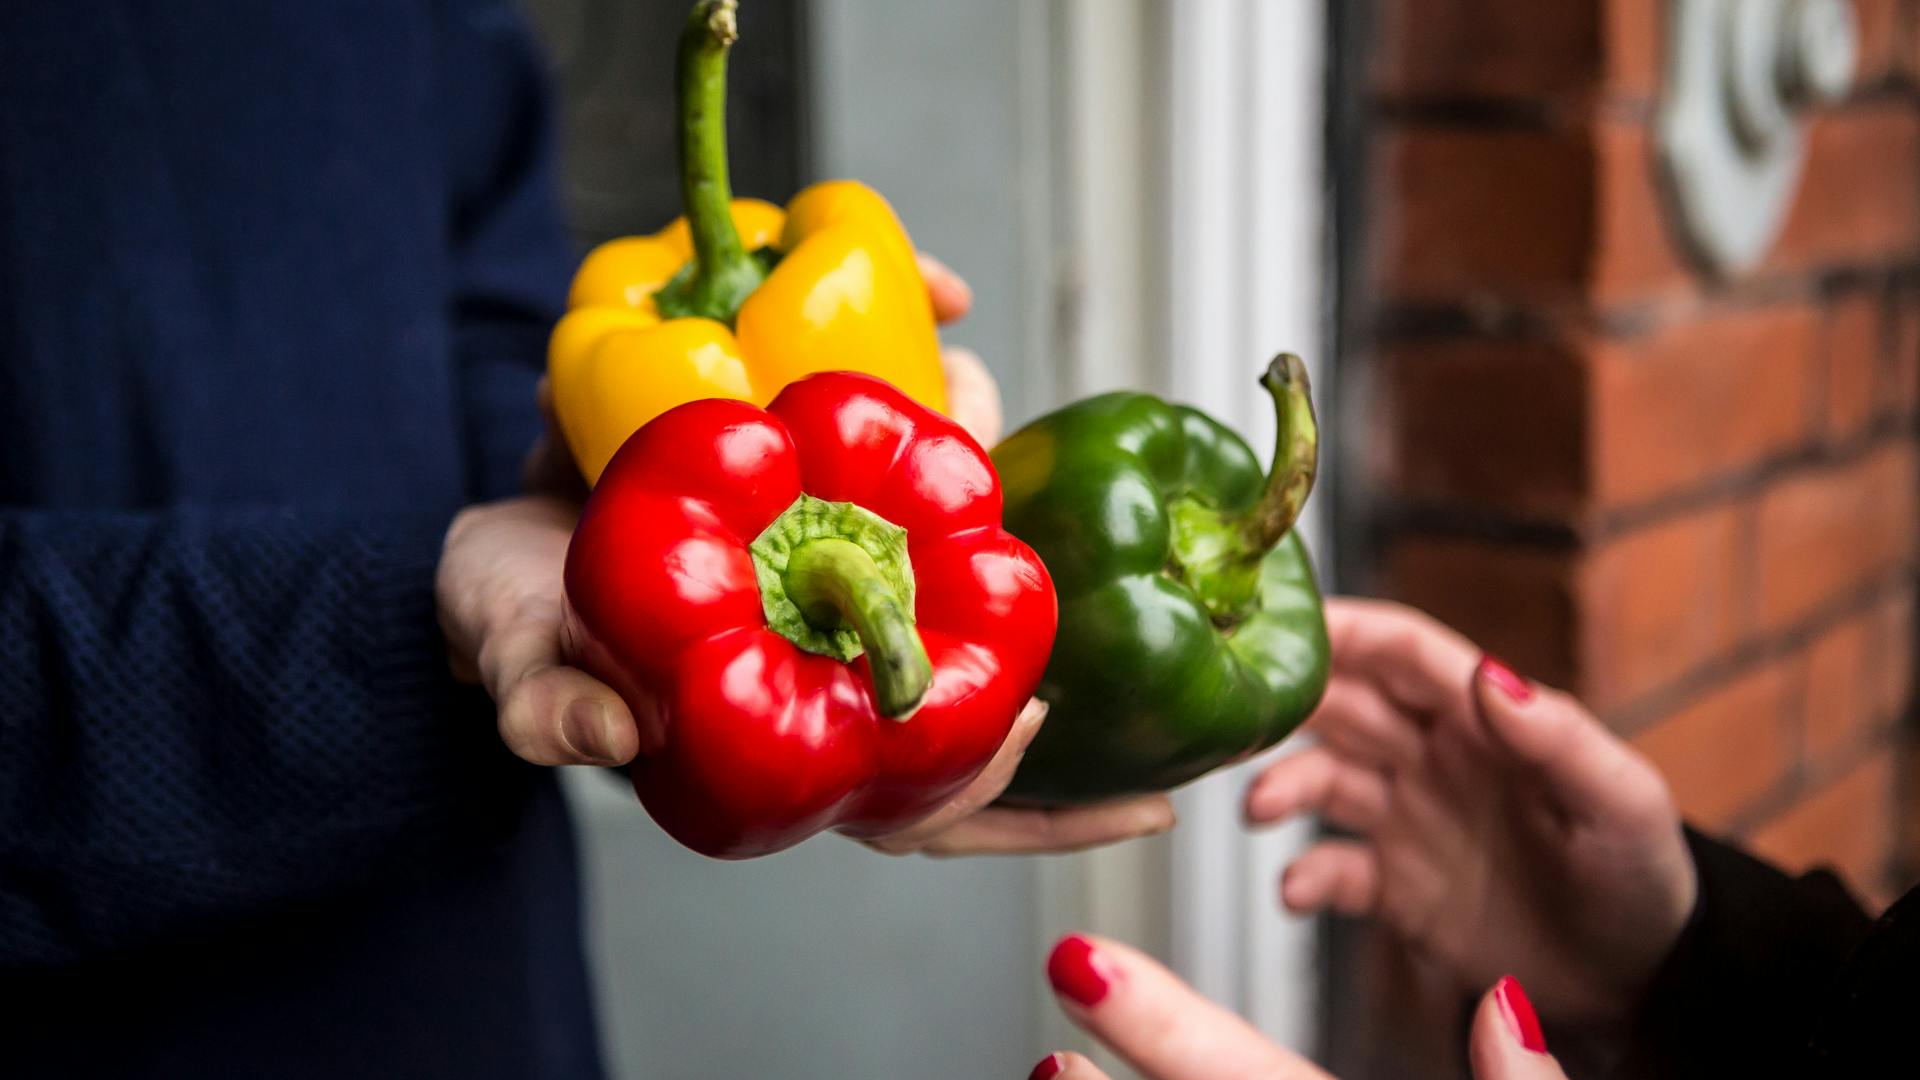 Photograph of green, yellow and red peppers